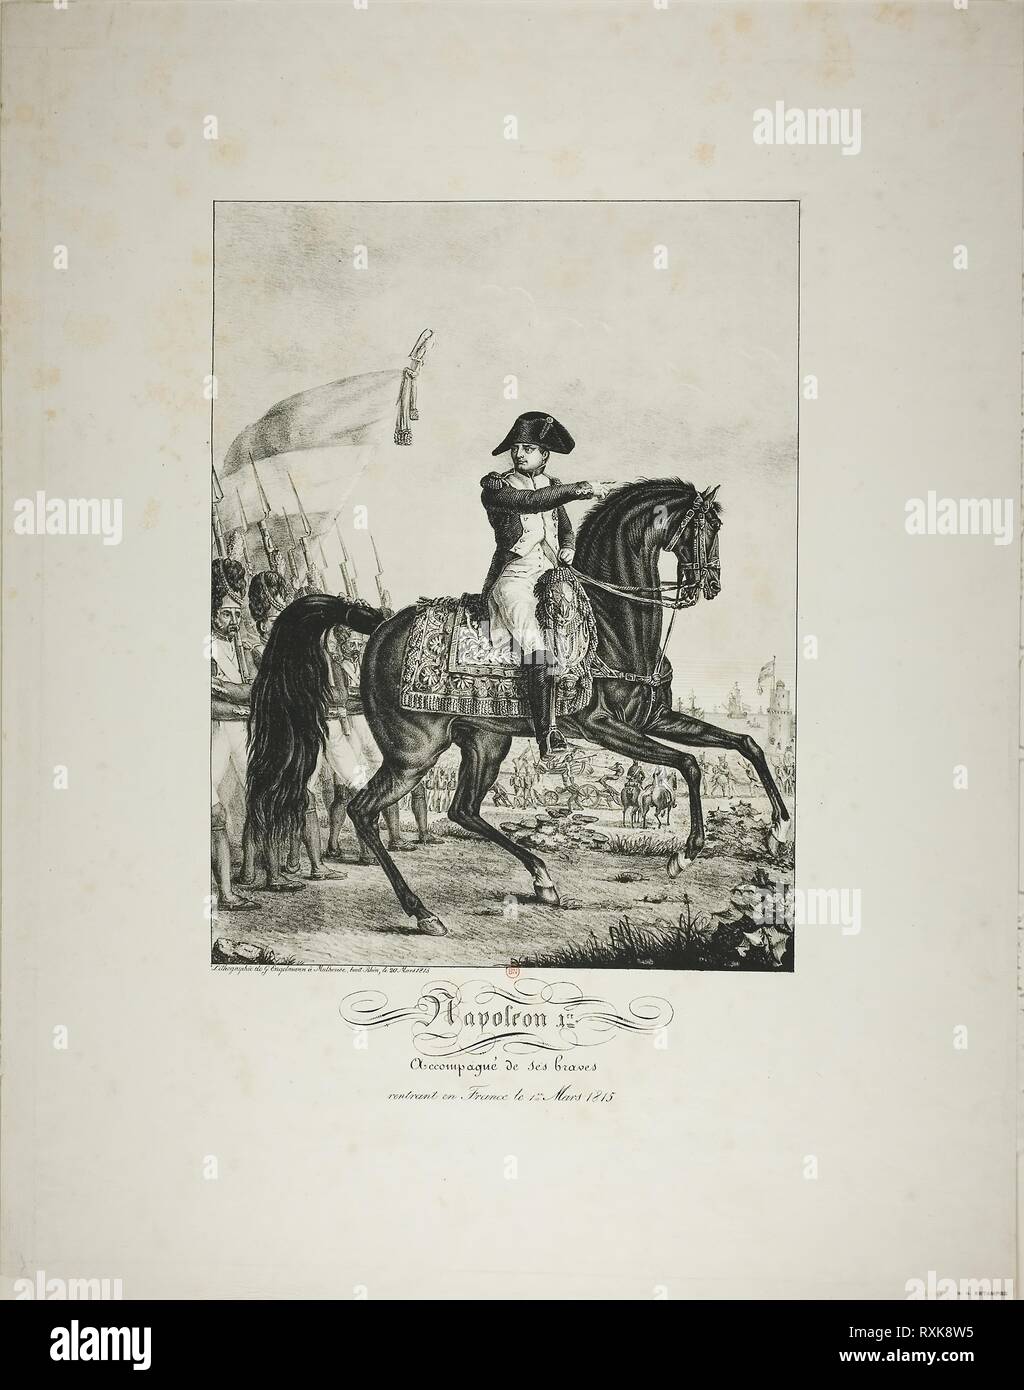 Napoleon Accompanied by his Good Men, Returning to France on March 1, 1815. Baron François Pascal Simon Gérard (French, 1770-1837); printed by Gottfried Engelmann (French, 1788-1839). Date: 1815. Dimensions: 321 × 245 mm (image); 548 × 427 mm (sheet). Lithograph in black, with a second tint stone in gray, on ivory wove paper. Origin: France. Museum: The Chicago Art Institute. Author: Baron Francois Pascal Simon Gerard. Stock Photo